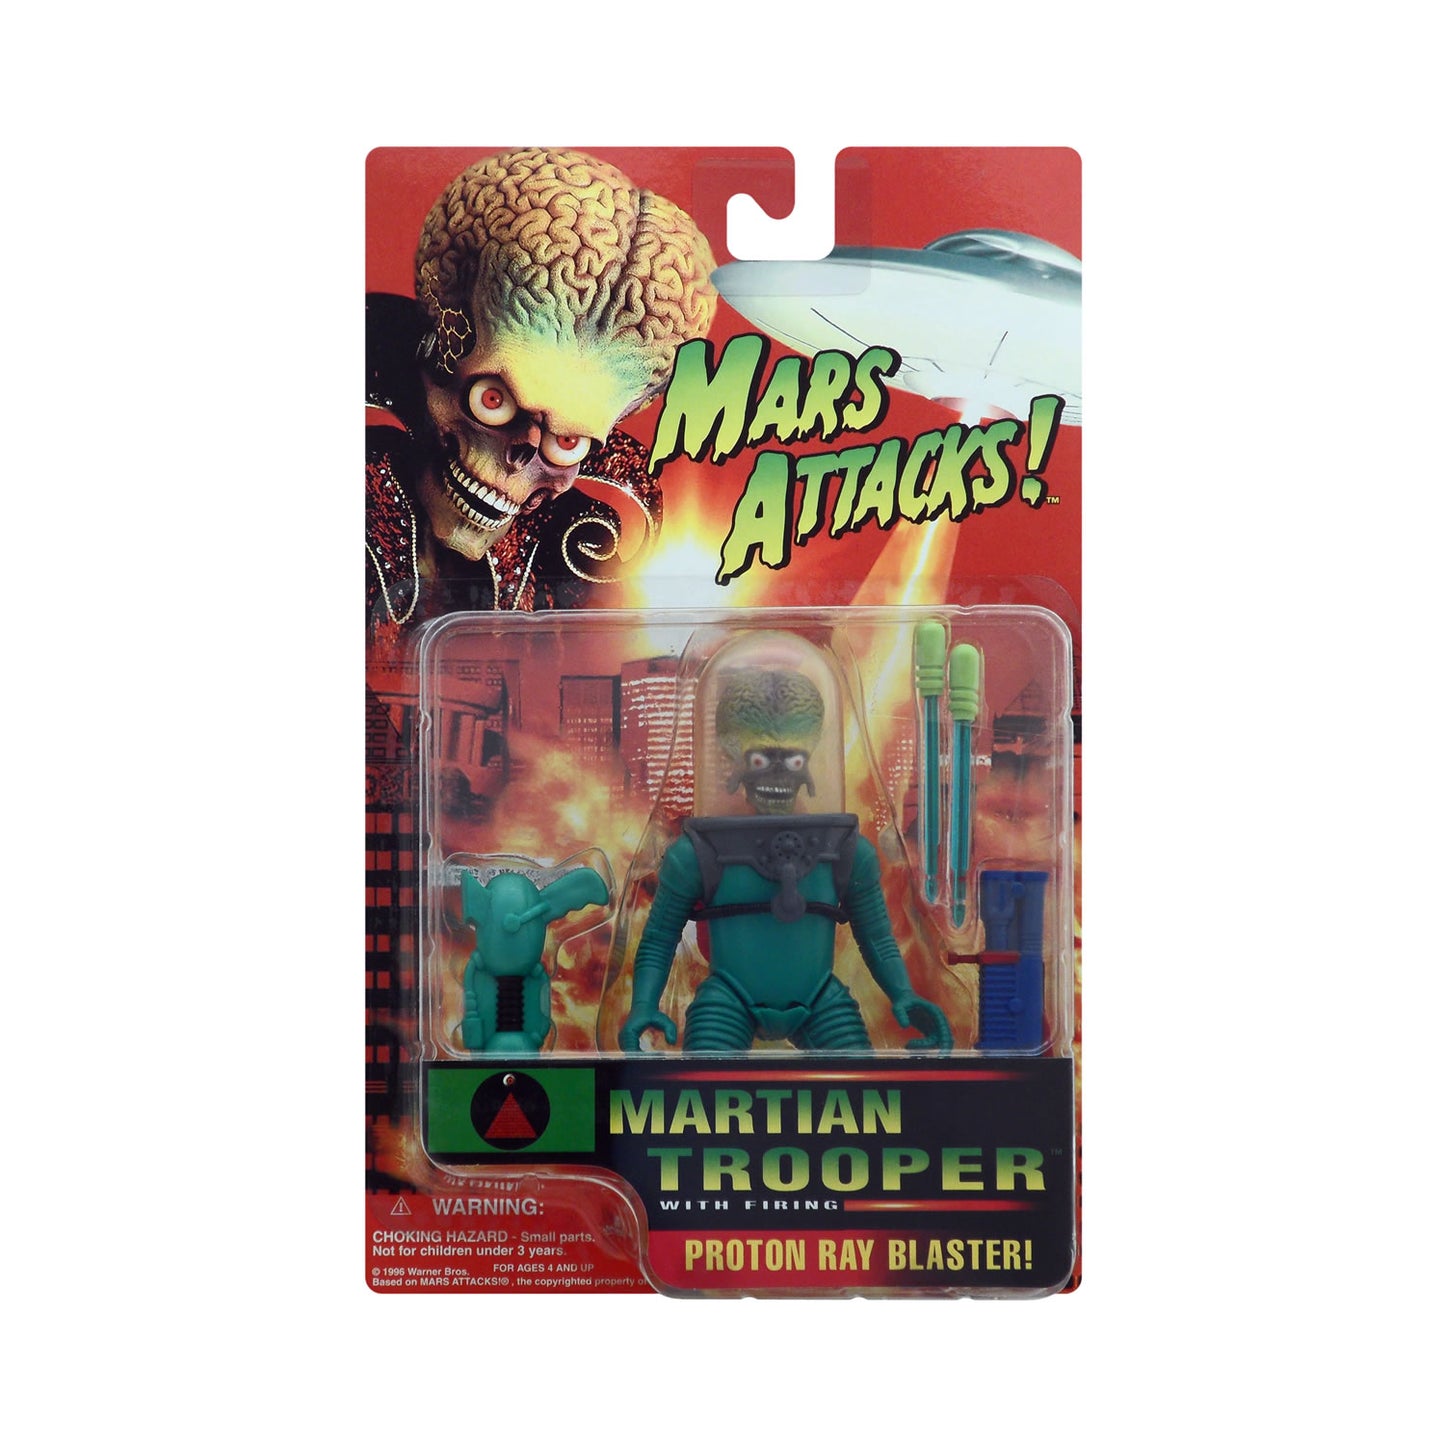 Martian Trooper with Proton Ray Blaster from Mars Attacks!